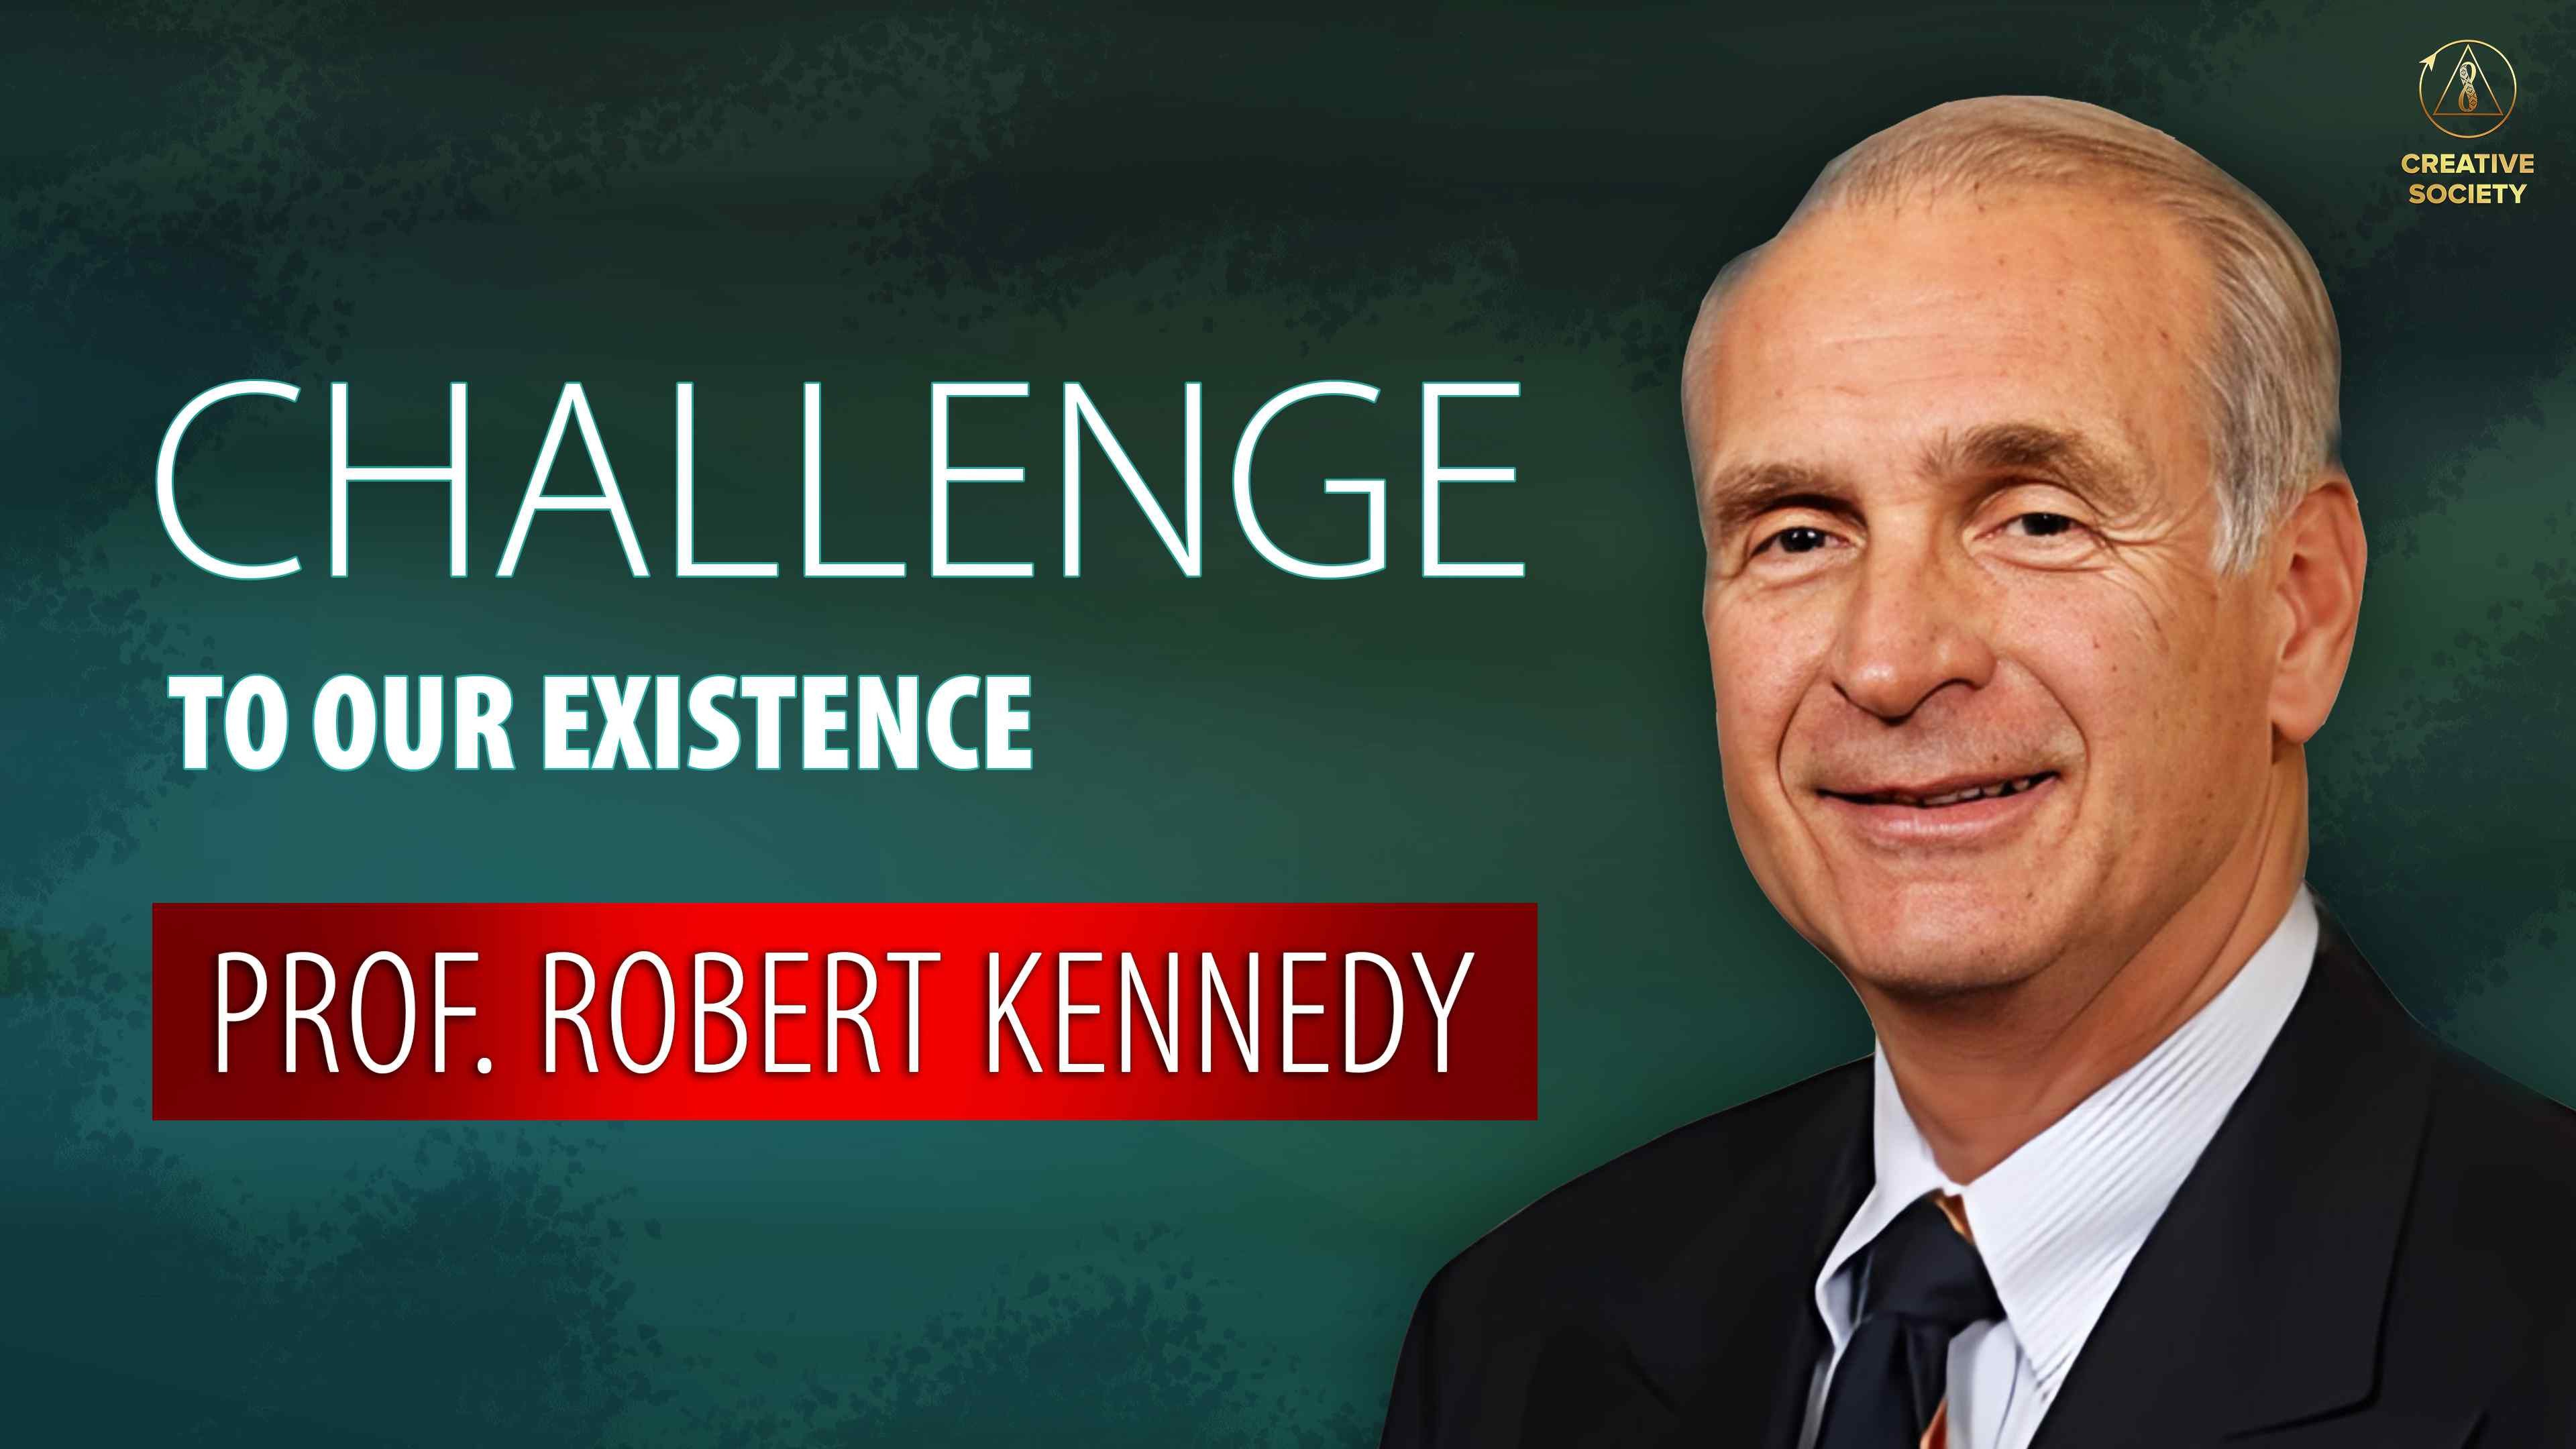 Prof. Robert Kennedy | Challenge to Our Existence